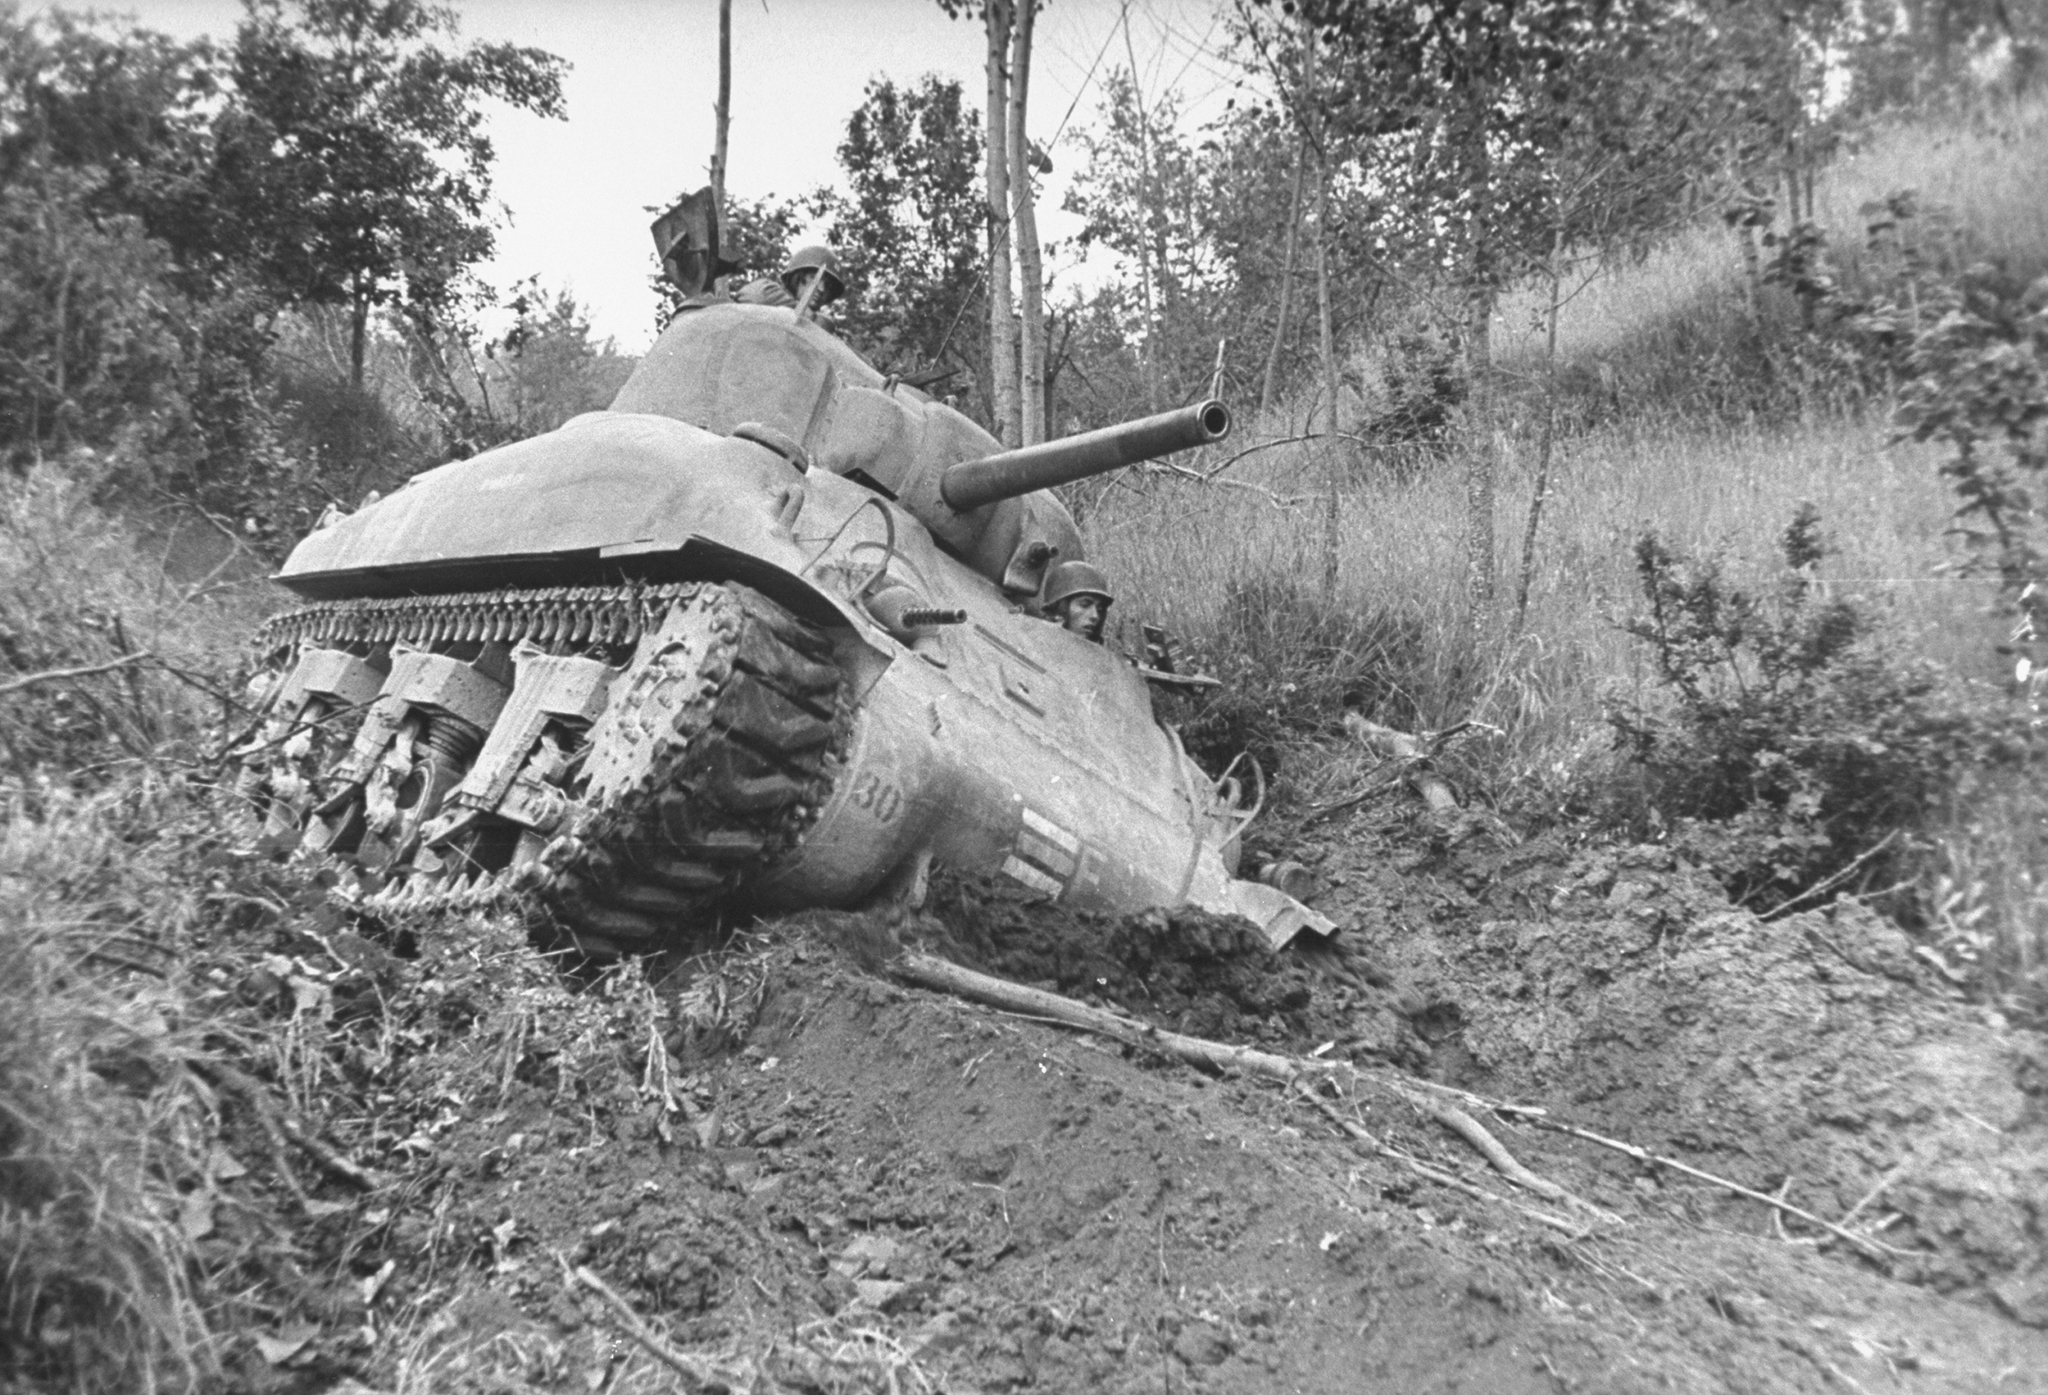 American M4 Sherman tank bogged down in the mud near Miturno during the campaign to drive German forces from Italy, 1944.